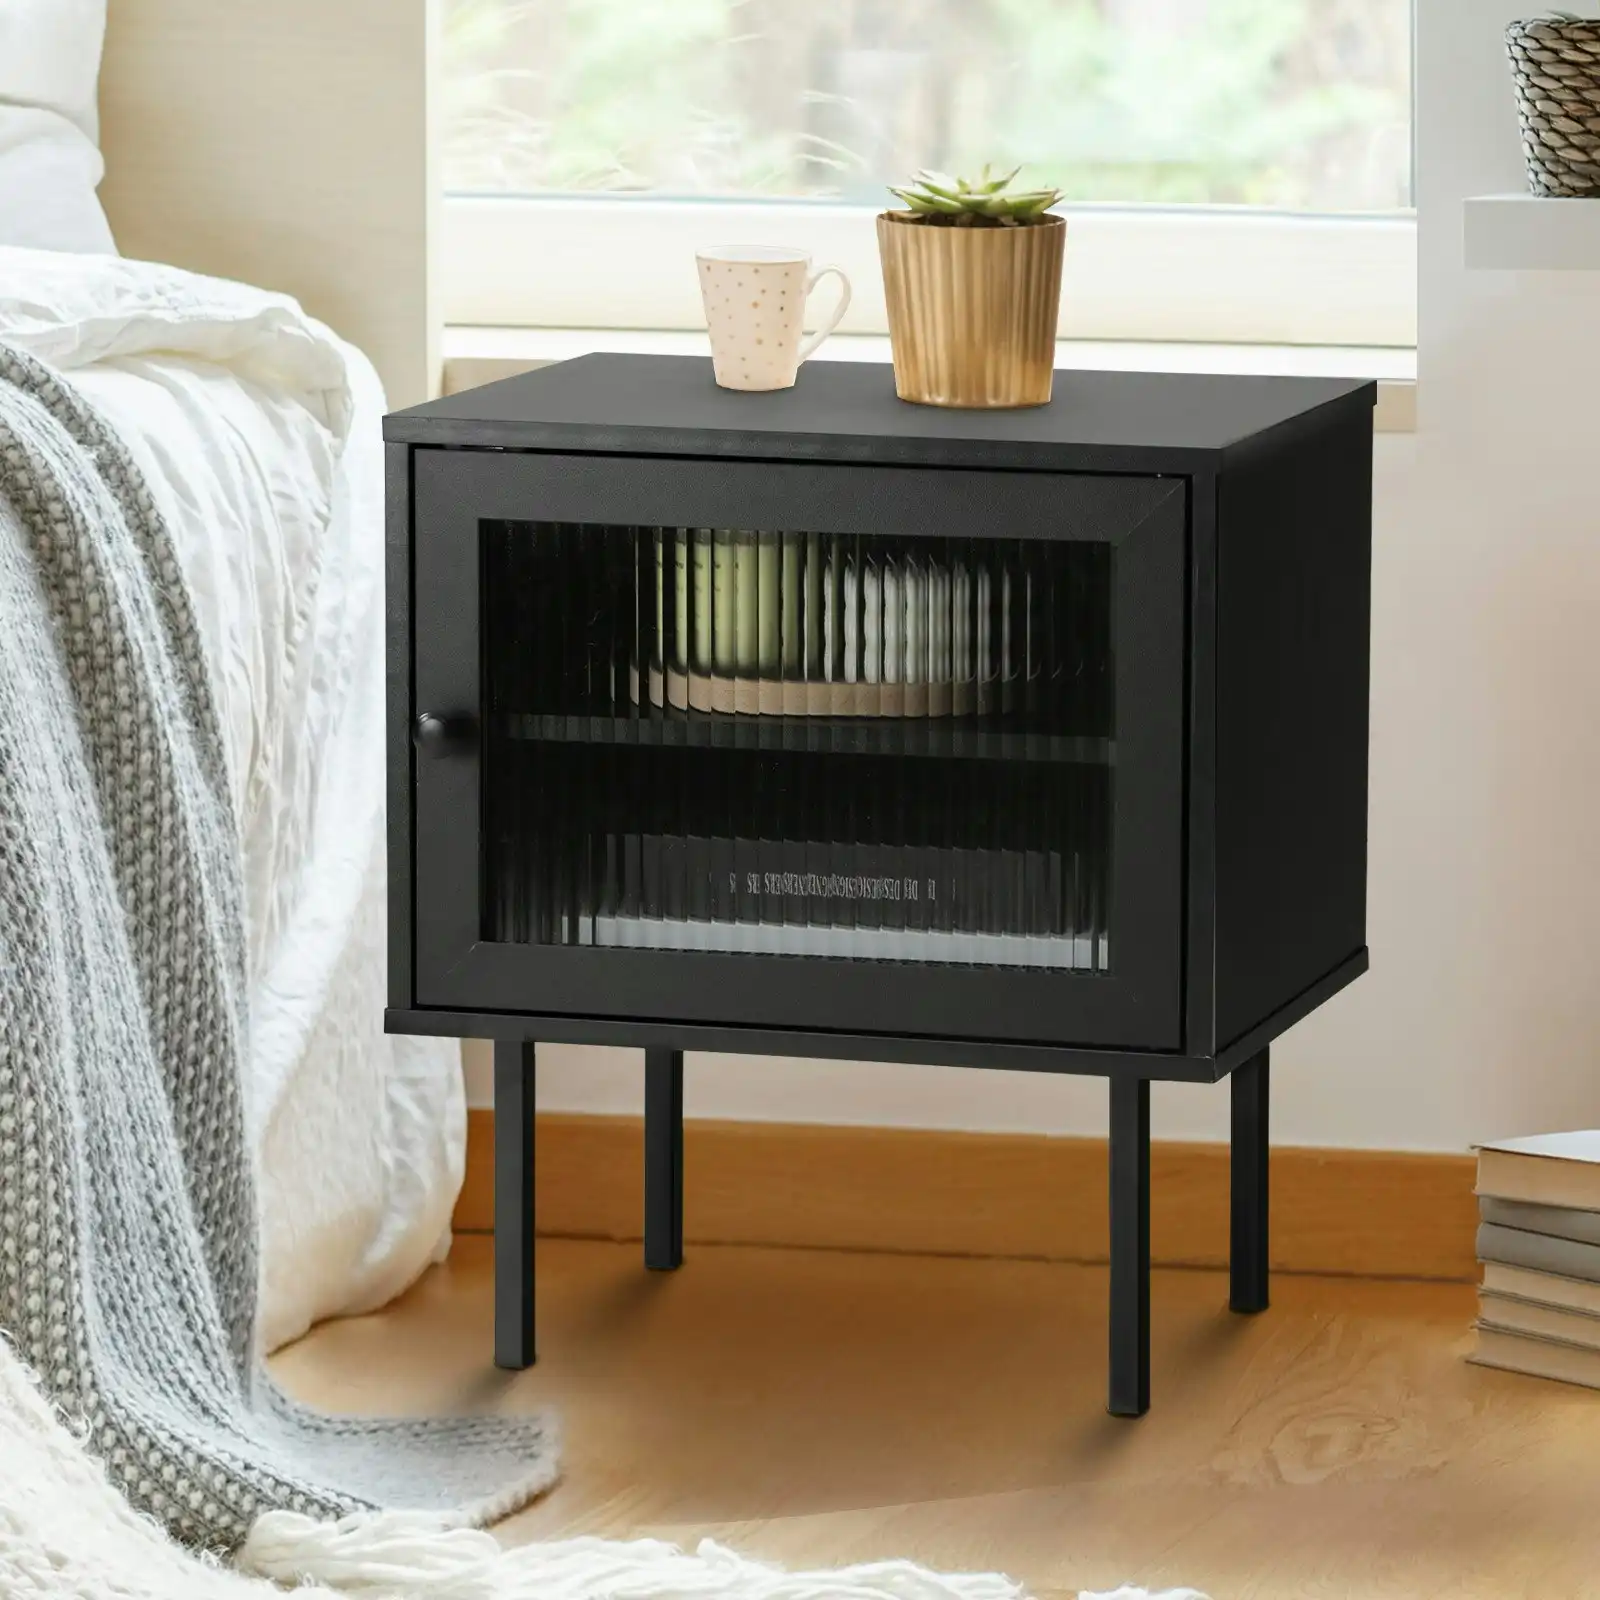 Oikiture Bedside Tables Nightstand Storage Cabinet Side End Table Wood Black